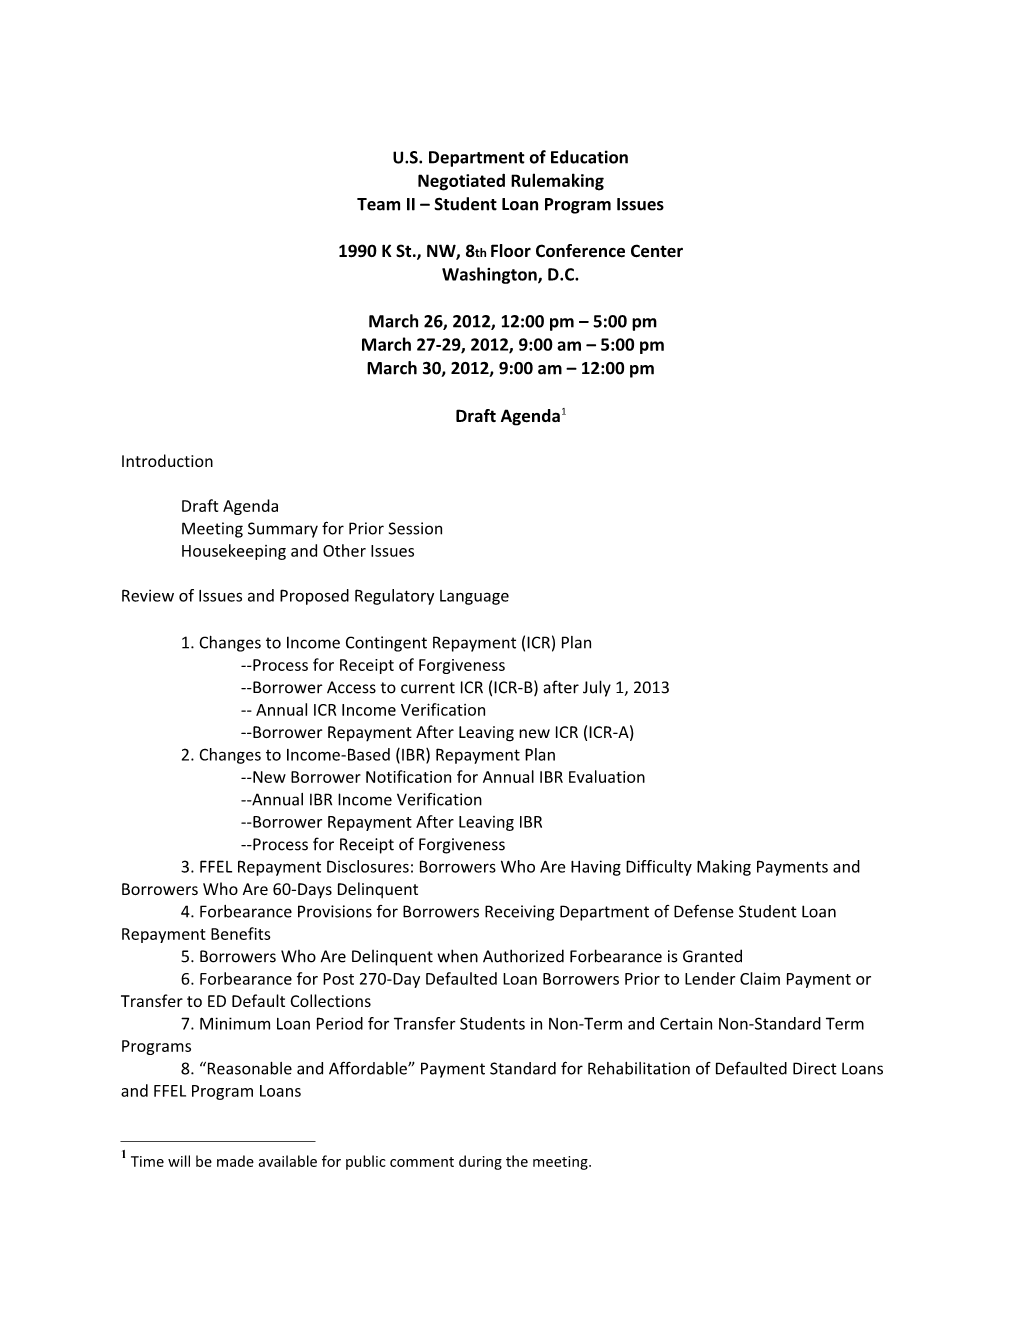 Negotiated Rulemaking for Higher Education 2011 Loans Team Two: Agenda Session 3 Dated